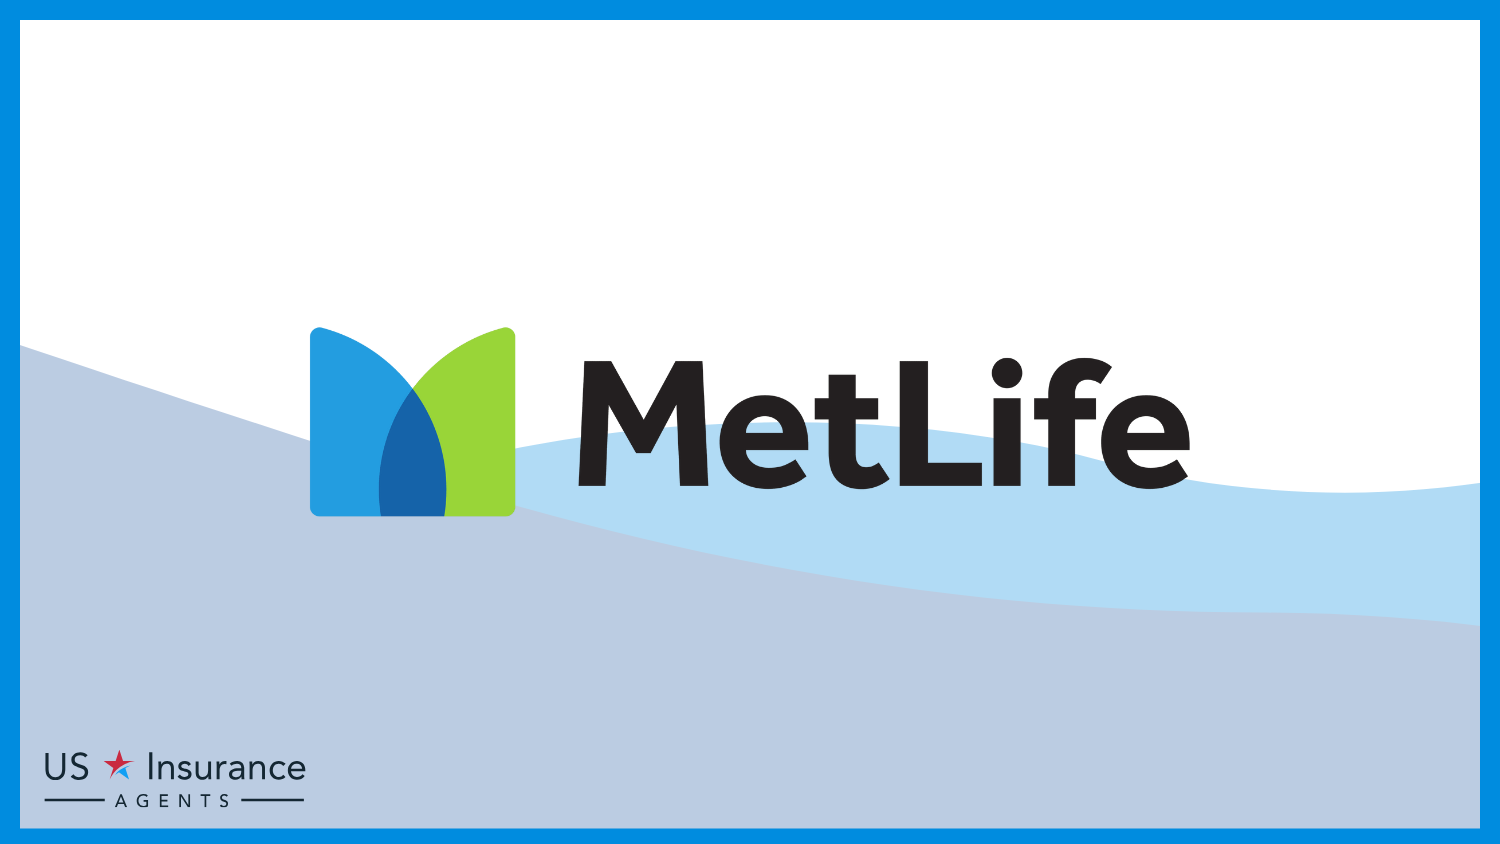 MetLife: Best Life Insurance for High-Net-Worth